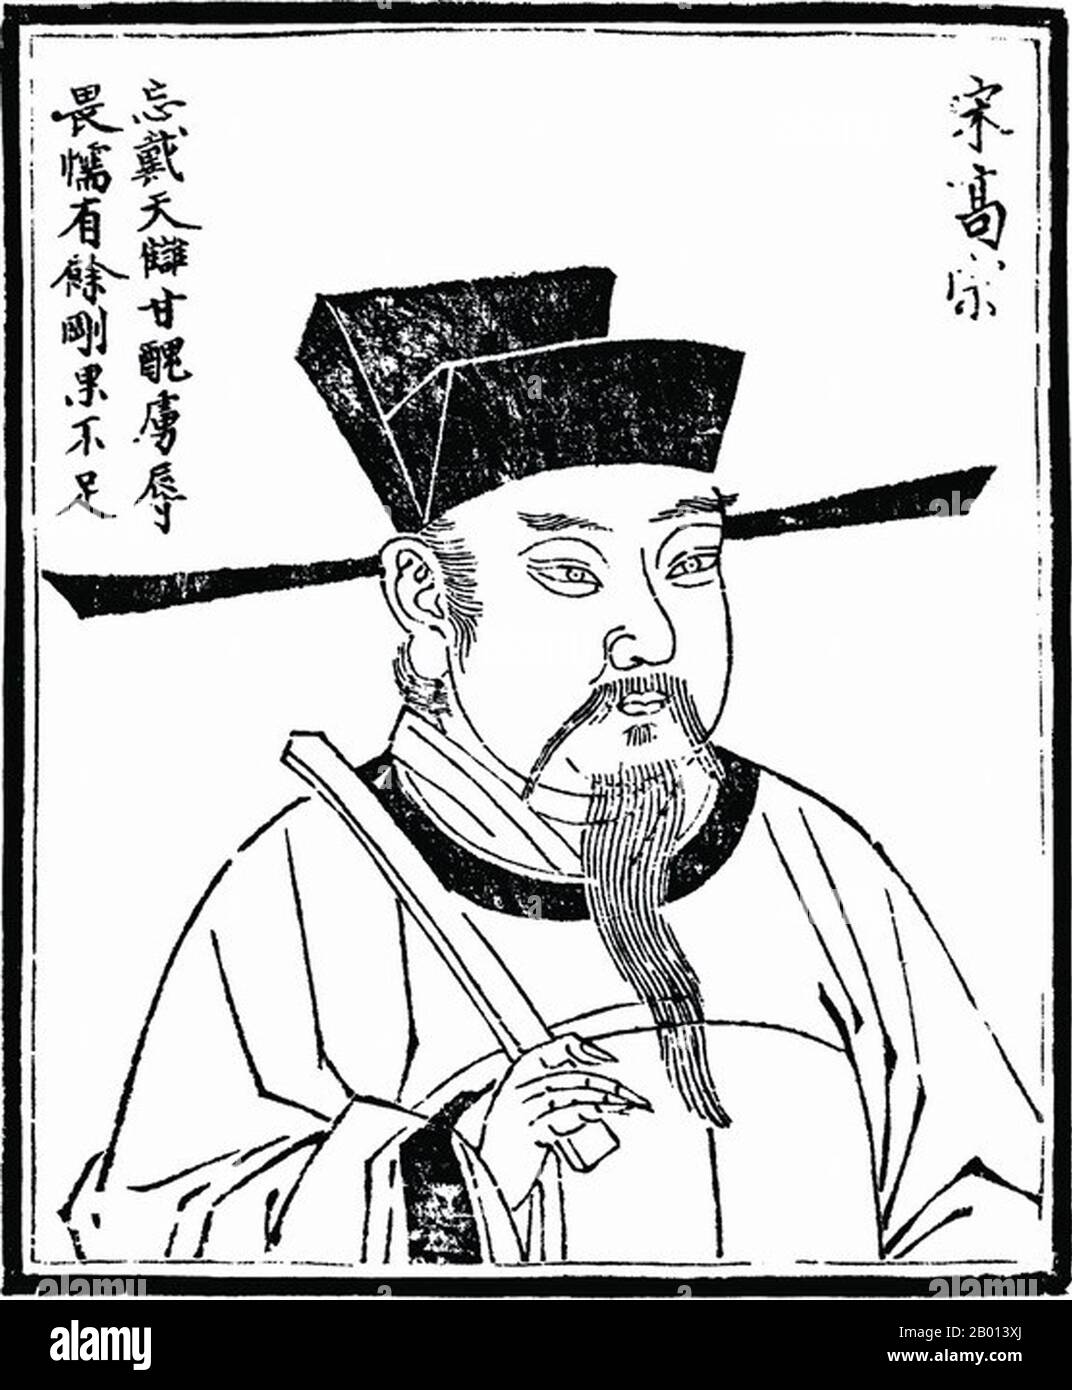 China: Emperor Gaozong (12 June 1107 - 9 November 1187), 10th ruler of the Song Dynasty (r. 1127-1129) and 1st ruler of the Southern Song Dynasty (r. 1129-1162). Illustration, c. 18th century.  Gaozong, personal name Zhao Gou and courtesy name Deji, was the tenth emperor of the Northern Song Dynasty. After the Qinzong and Huizong emperors were captured by the Jurchen, he became the emperor and established the Southern Song empire at Lin'an (modern Hangzhou). During his reign, Jurchens often attacked the Southern Song empire. Stock Photo